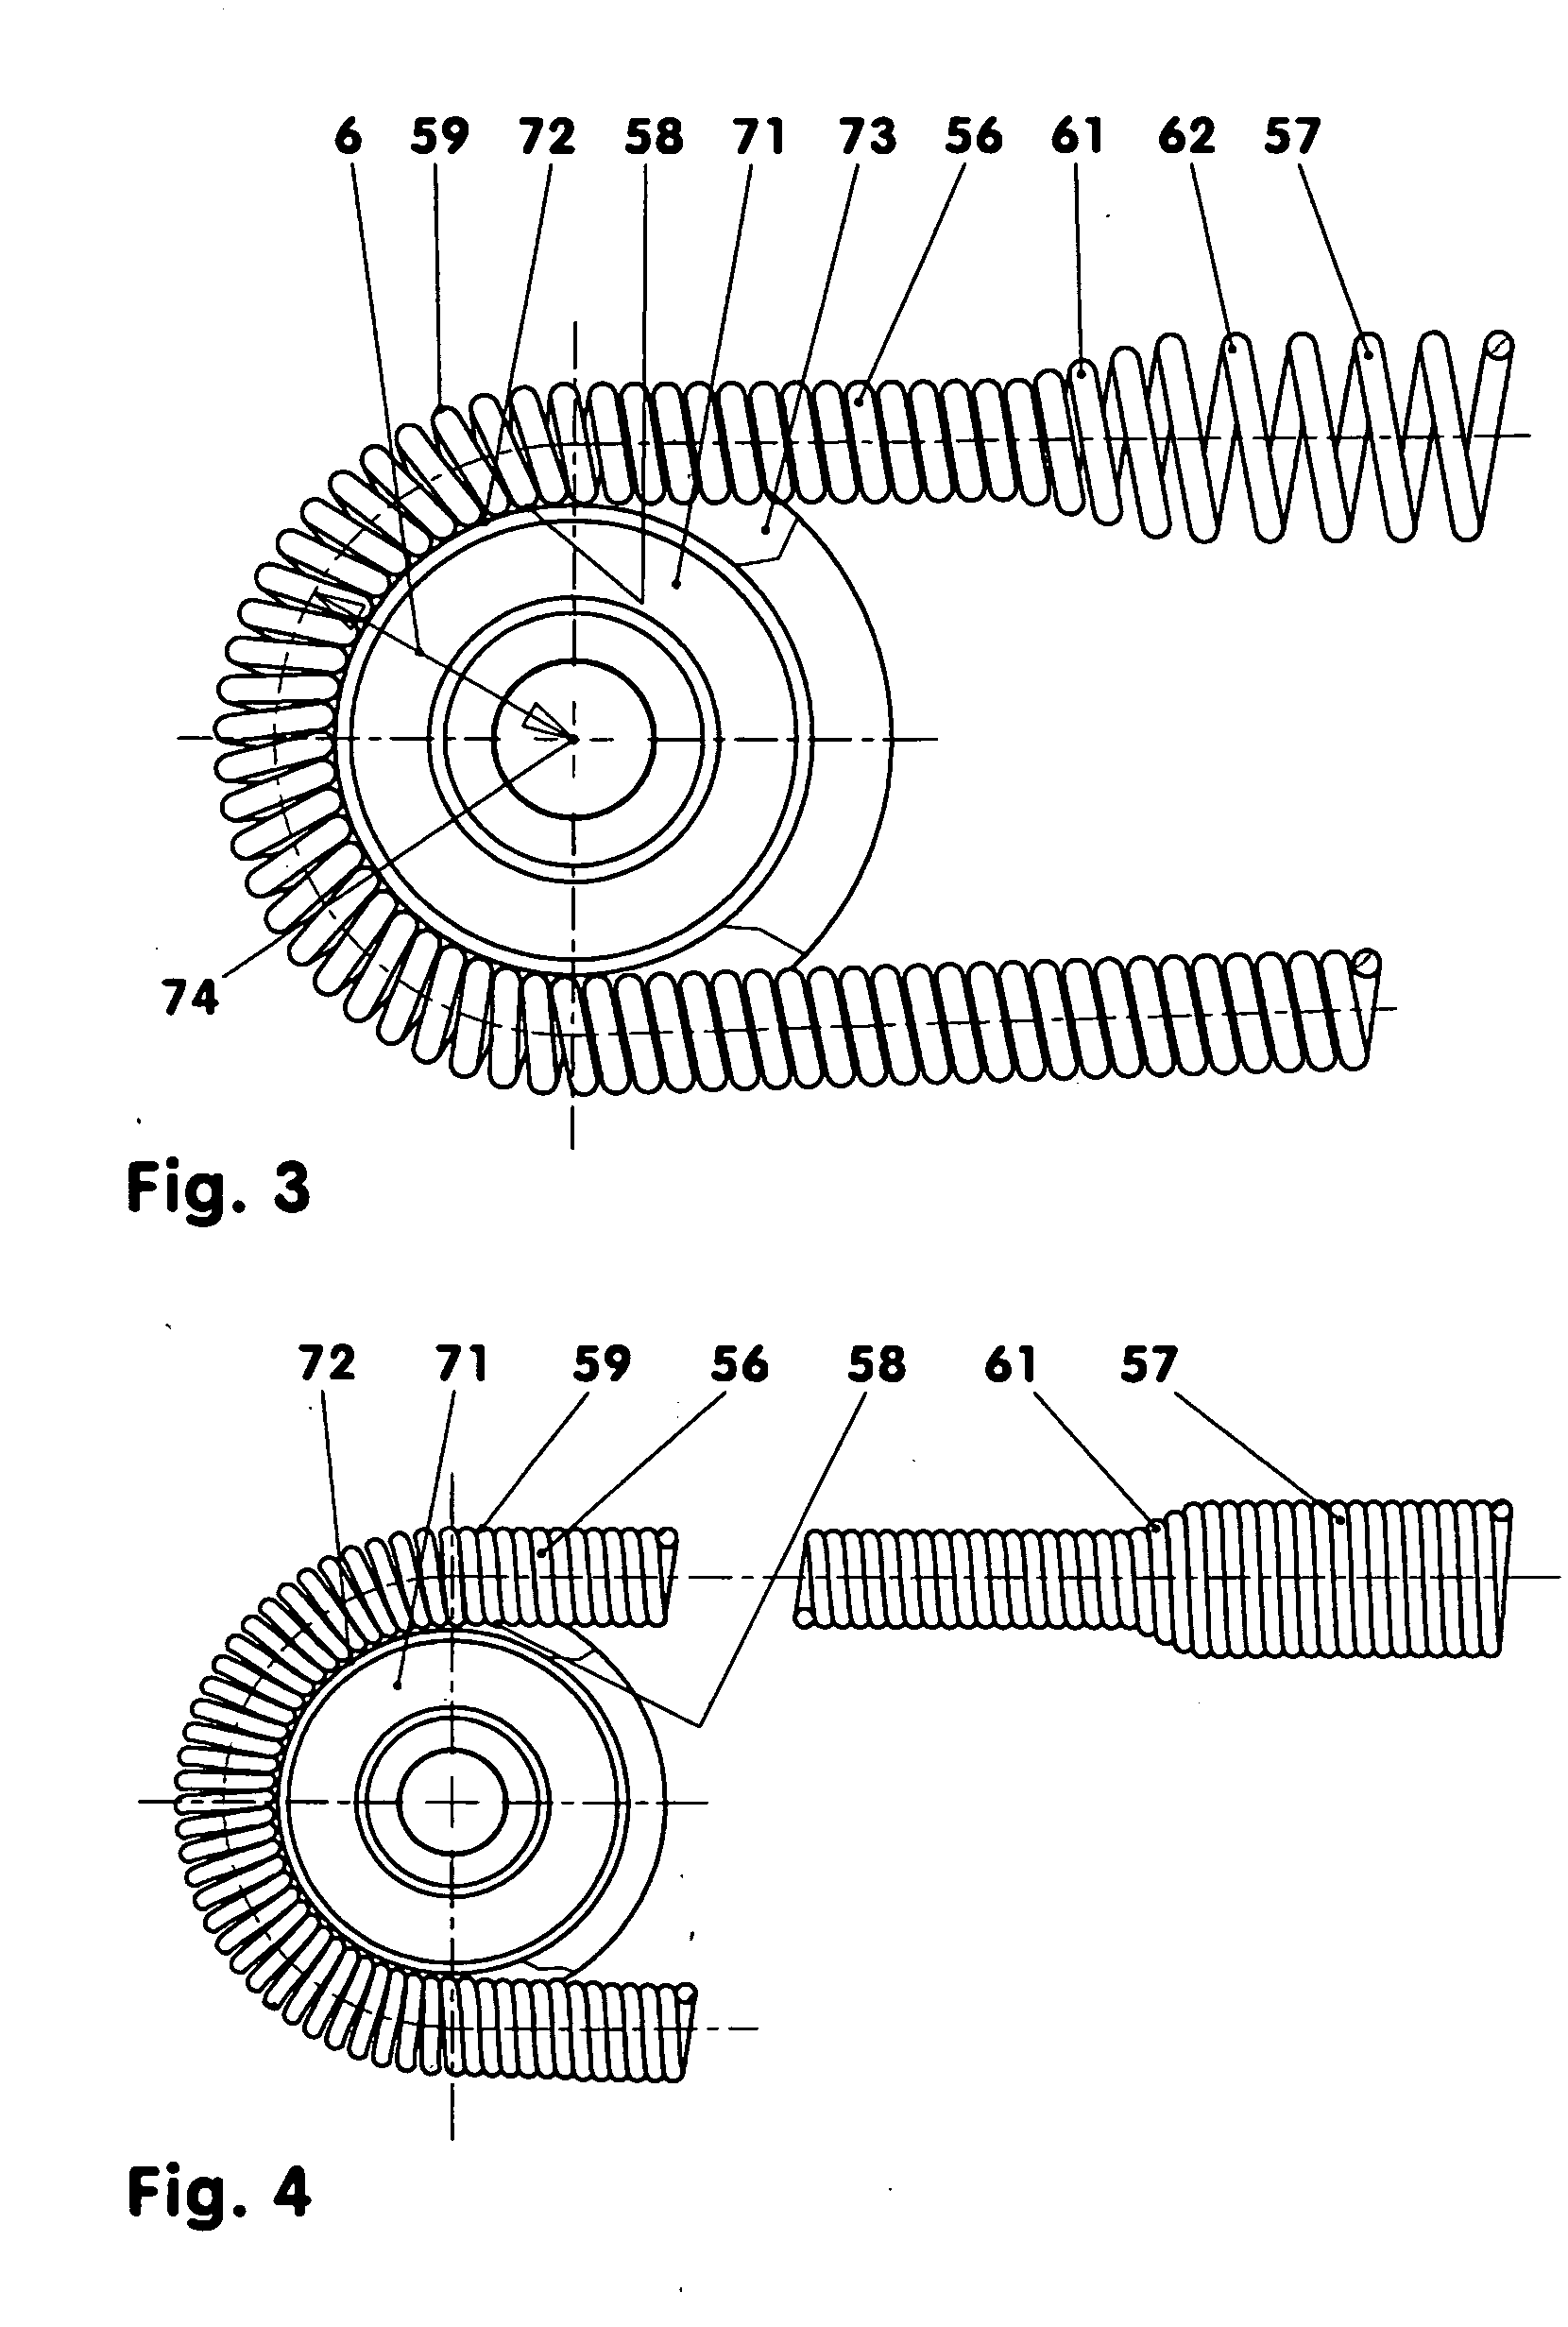 Pull arrangement with reversing tension spring